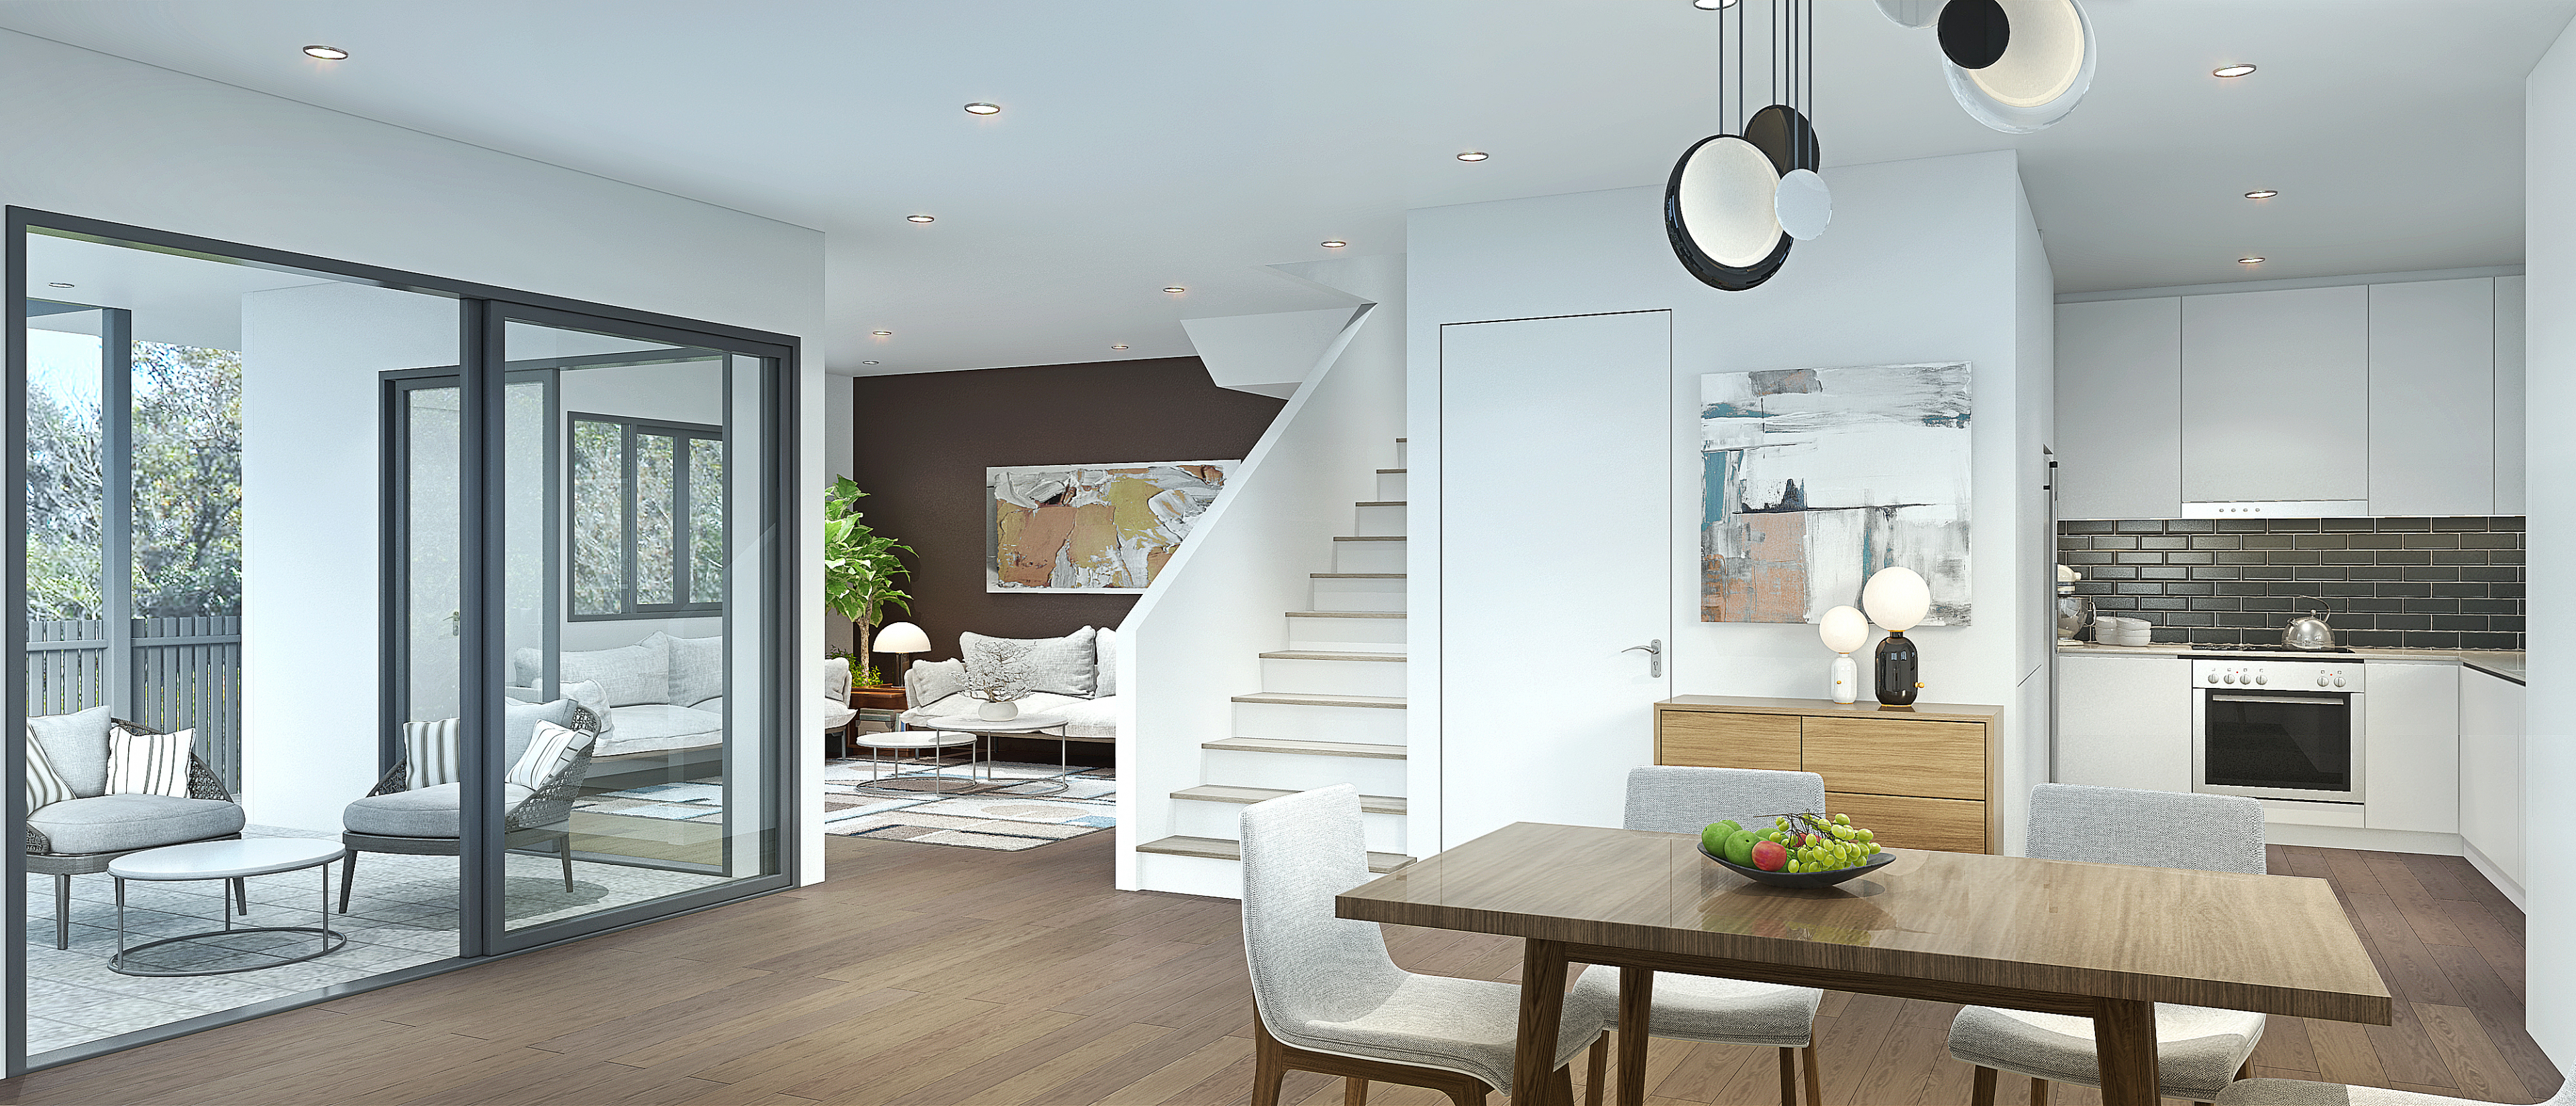 For your eyes only, INTERIOR in 3d max vray 3.0 image